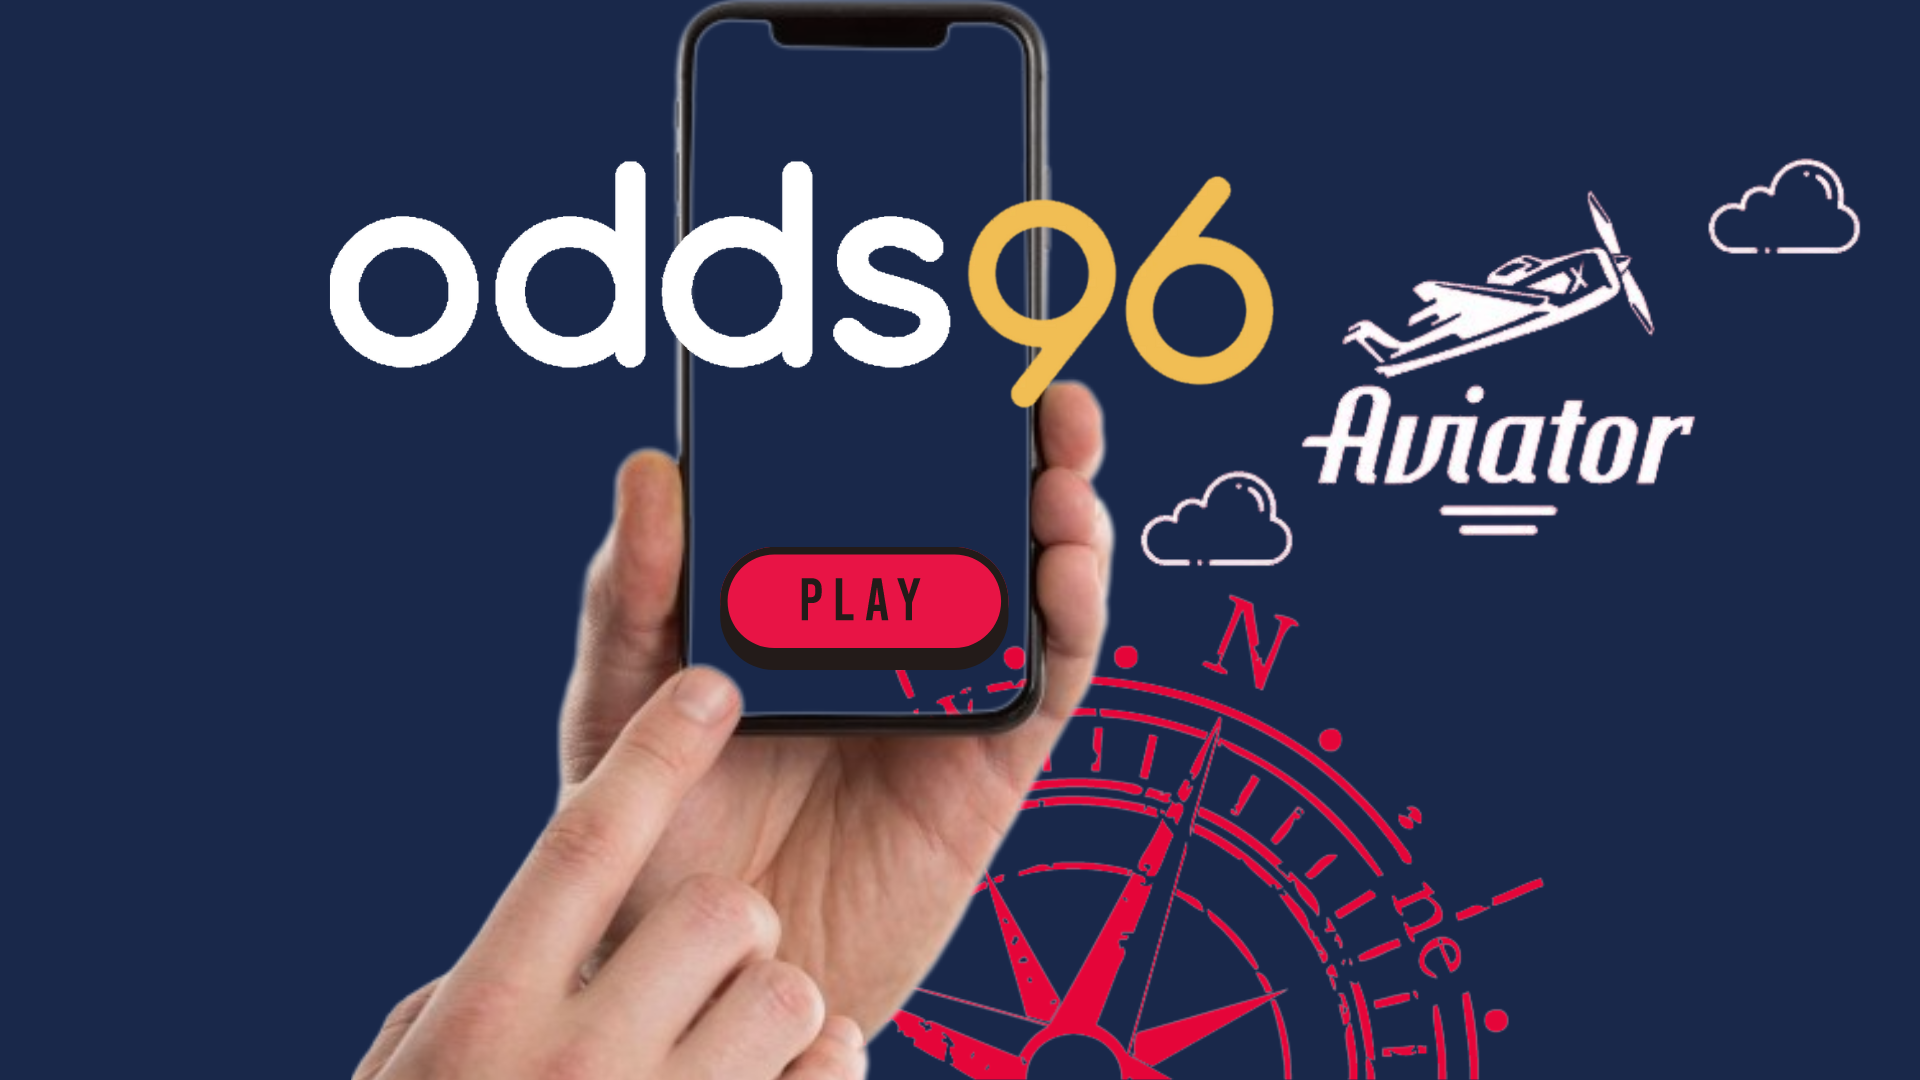 Logos of the Aviator game and Odds96 casino, and a hand holding smartphone